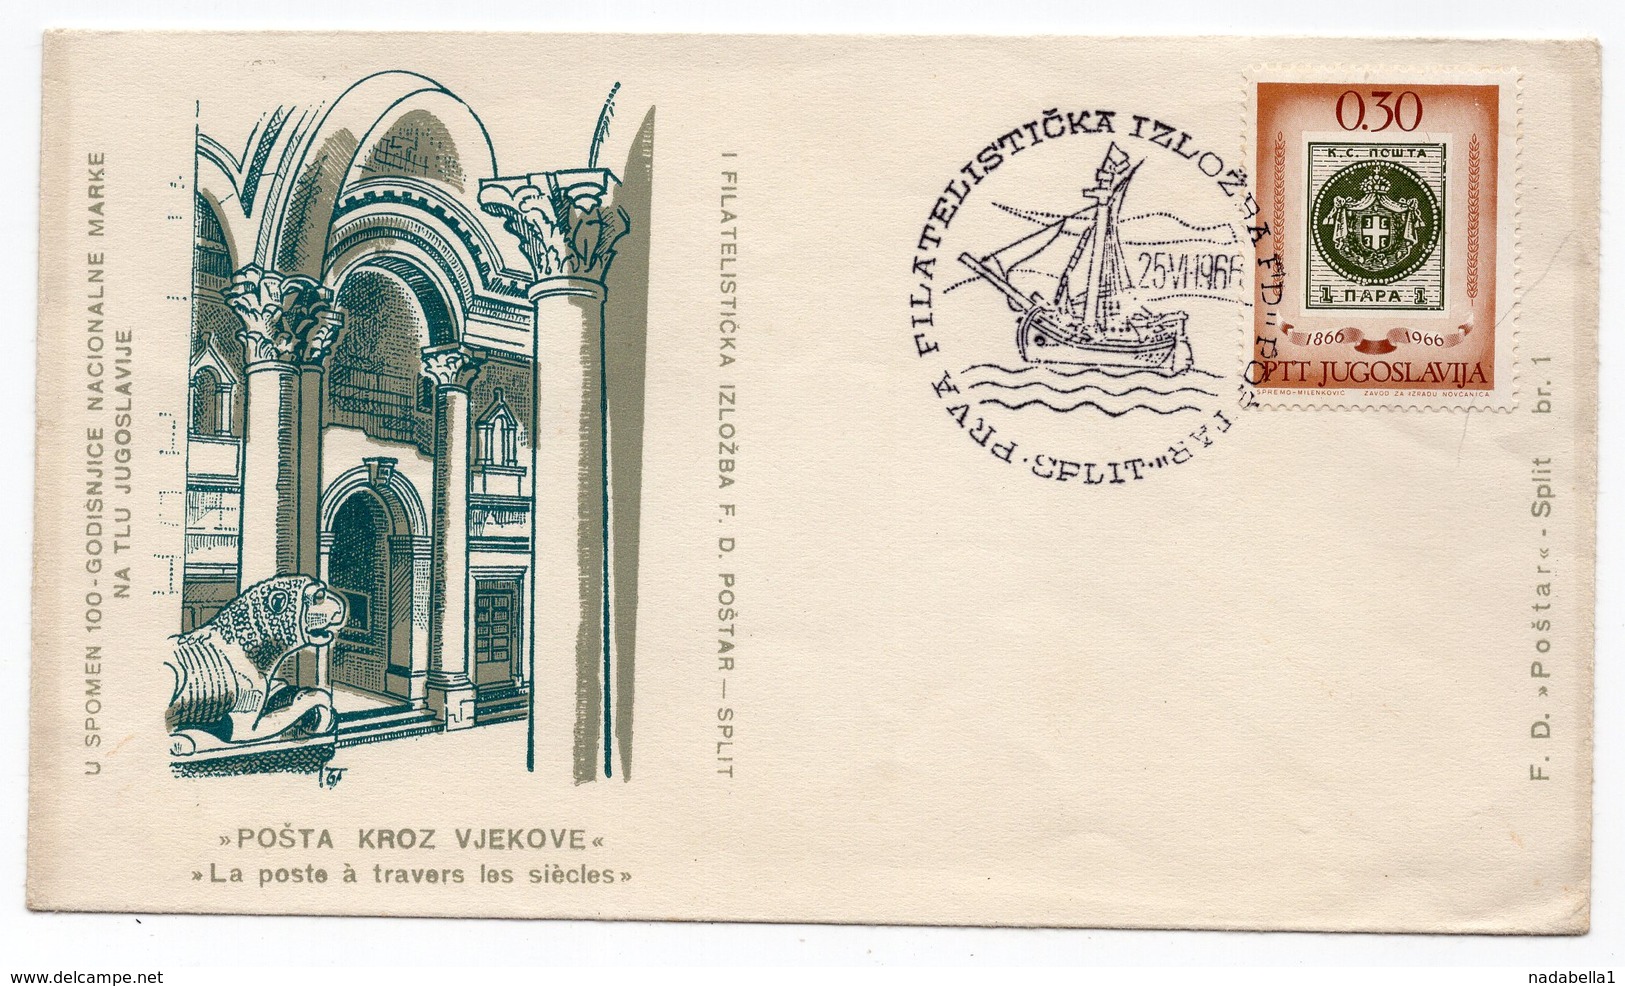 1966 YUGOSLAVIA, CROATIA, SPLIT, SPECIAL COVER: POST OFFICE THROUGH CENTURIES, SPECIAL CANCELATION, SAILING SHIP - Covers & Documents